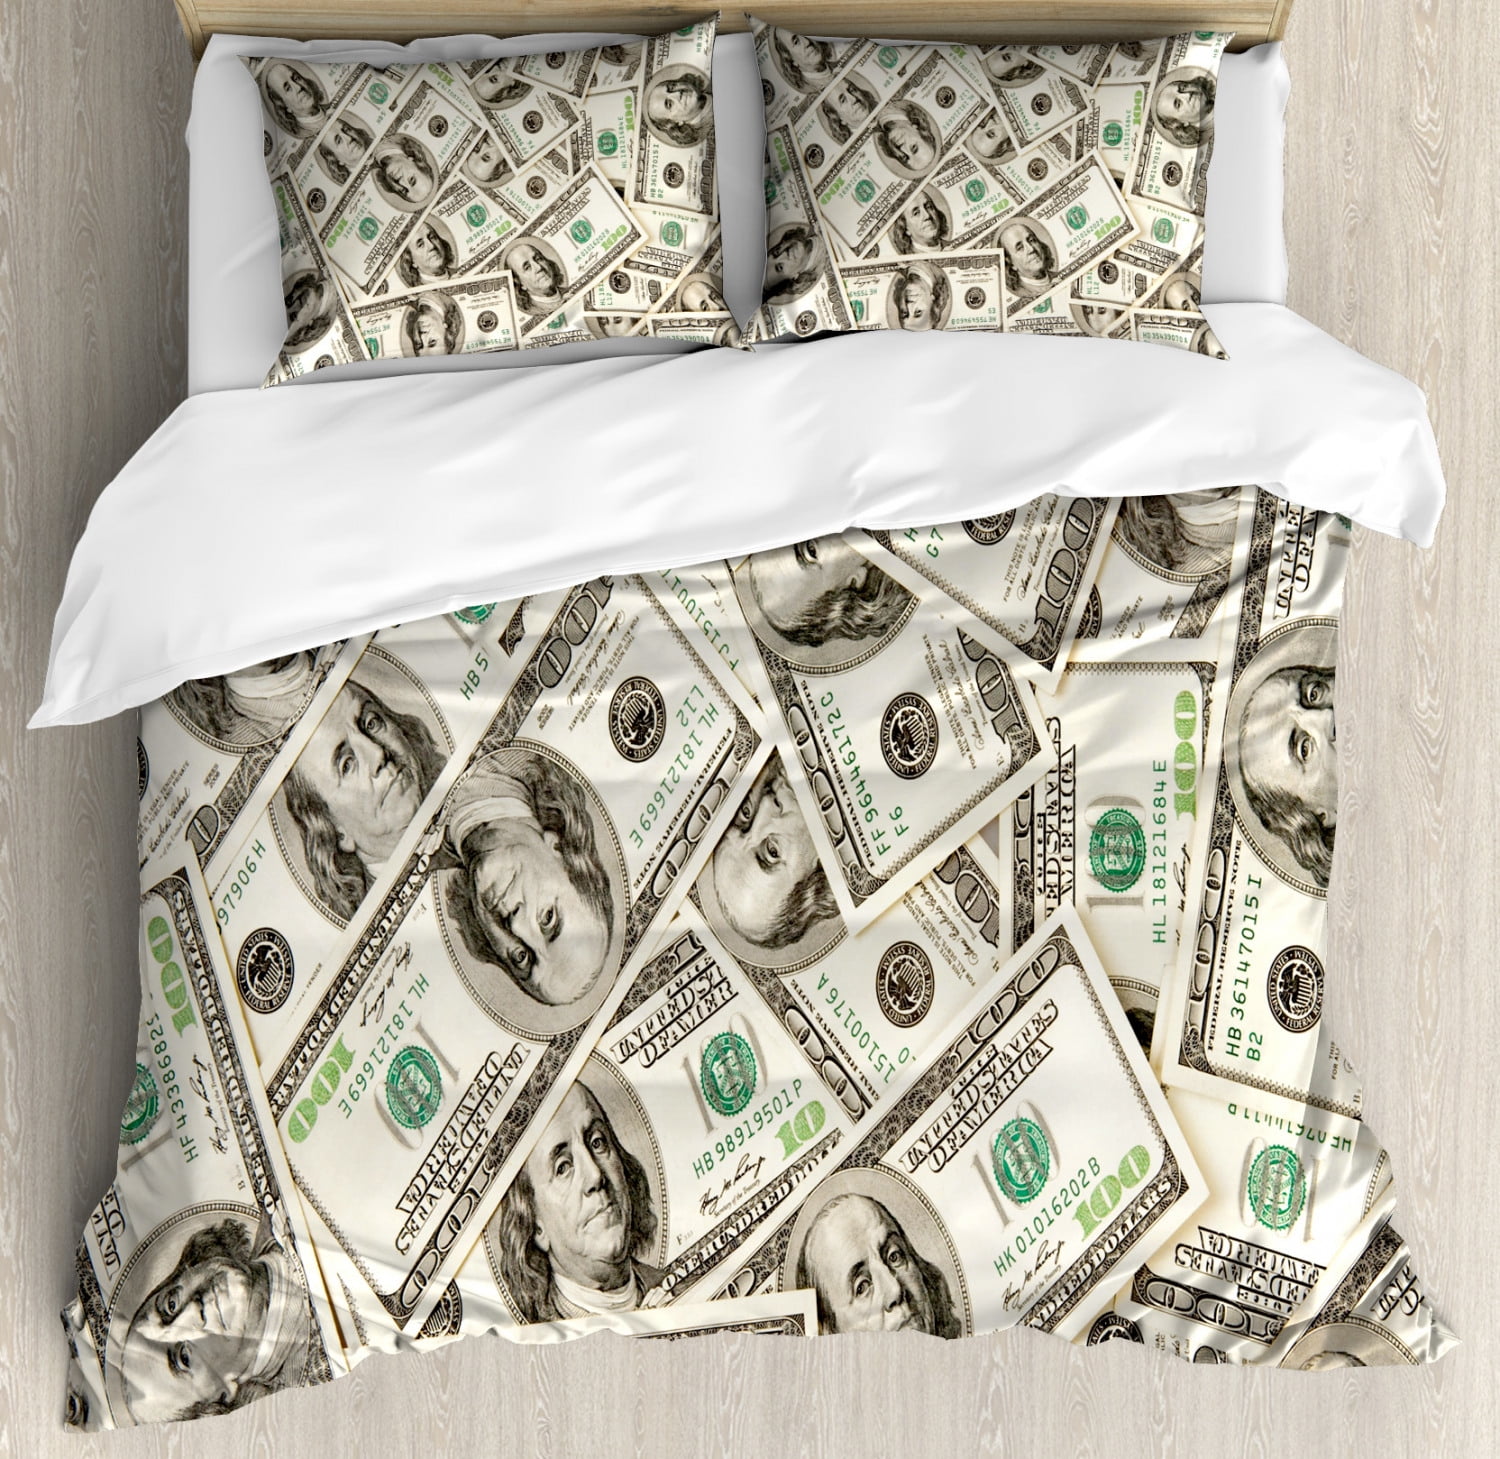 Soft Comfortable Top Sheet Decorative Bedding 1 Piece Pale Green Grey Ambesonne Money Flat Sheet Twin Size Heap of Dollars Pattern Currency Pile with Ben Franklin Portrait Wealth Theme